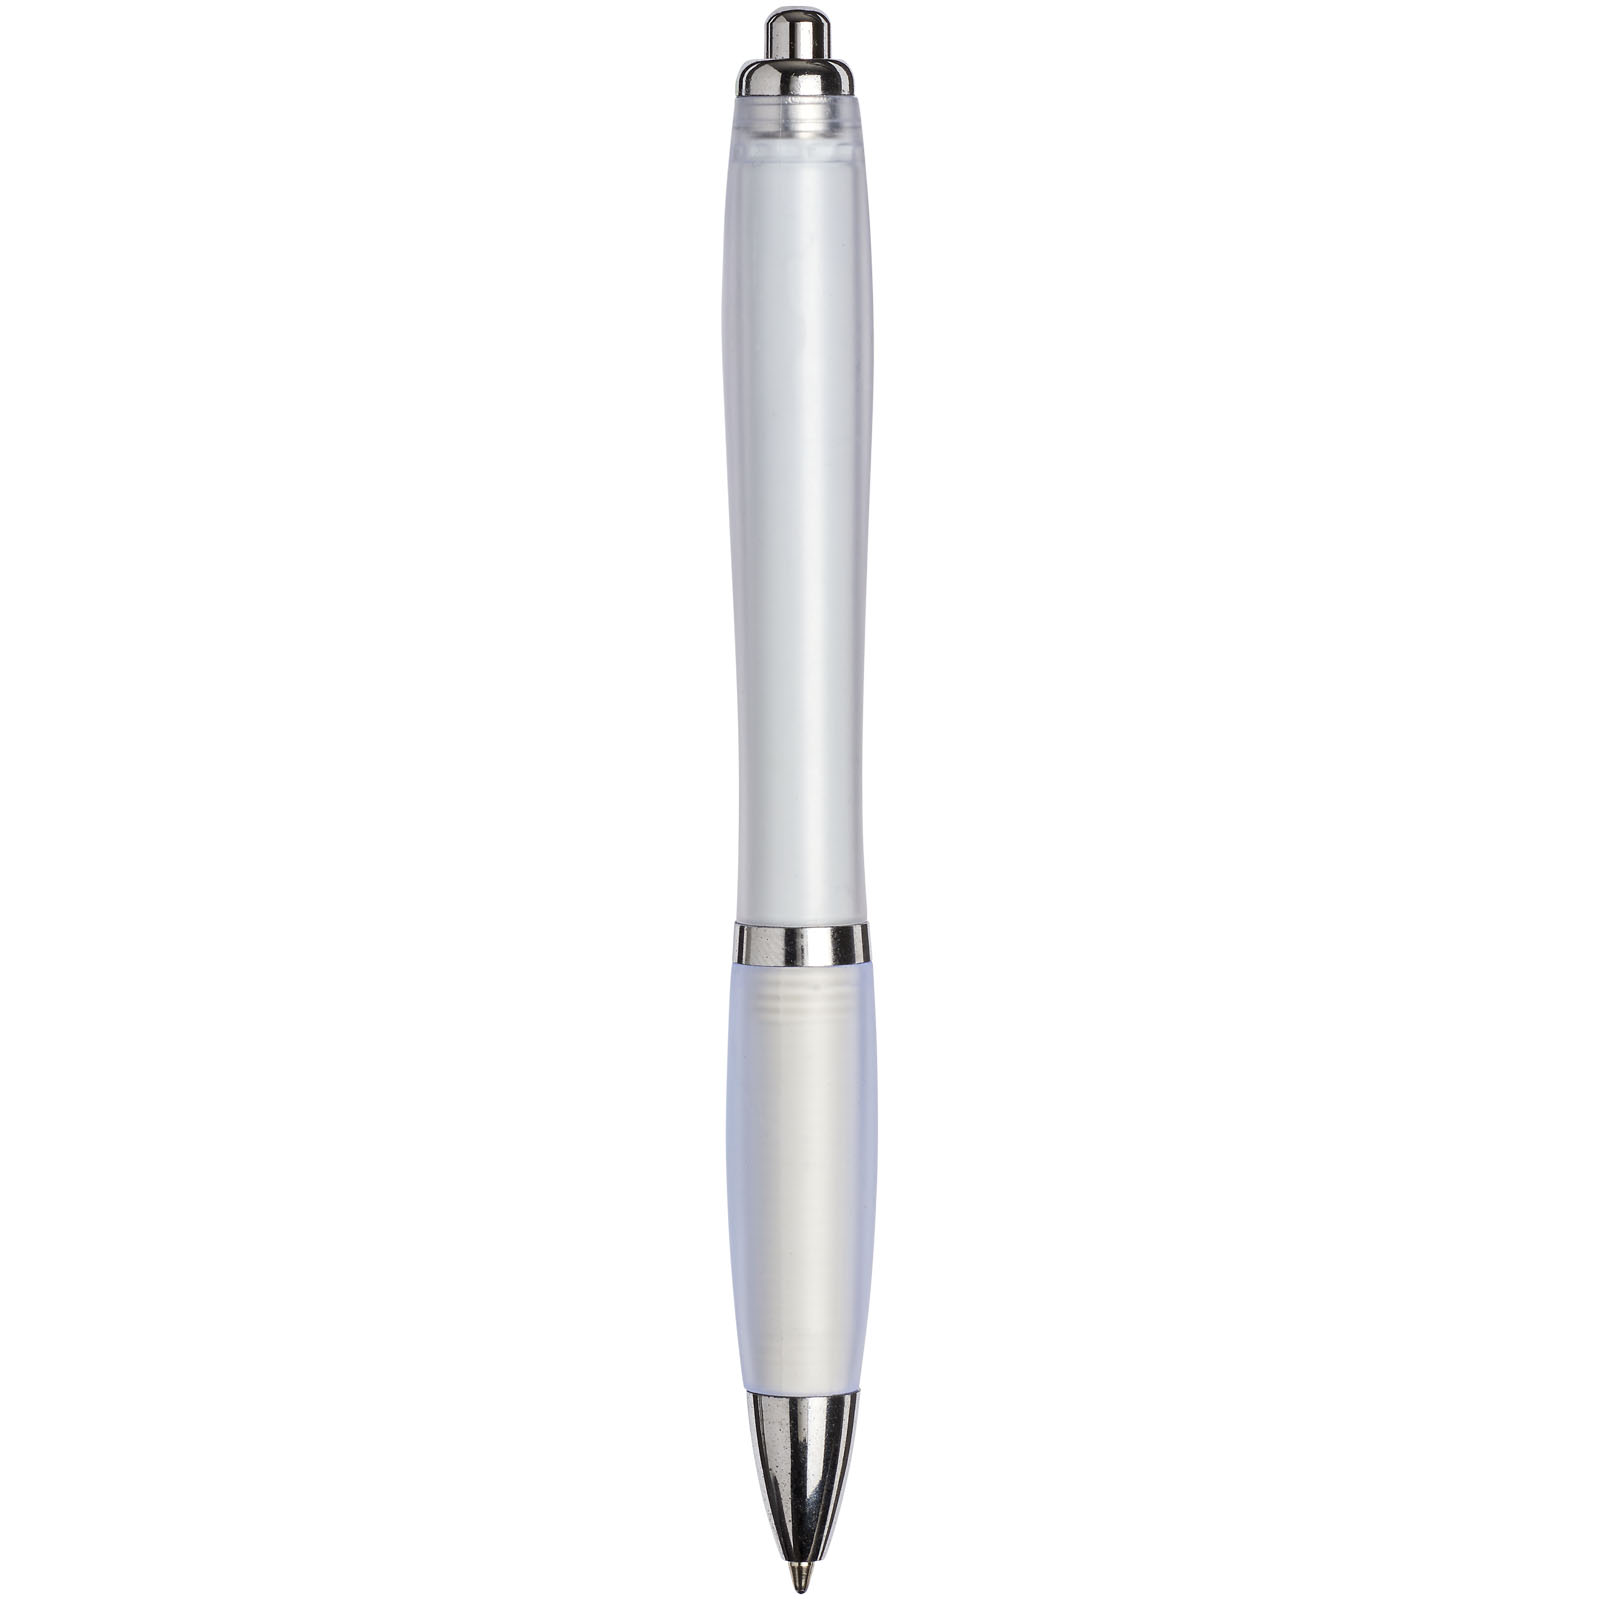 Stylos-bille publicitaires - Curvy ballpoint pen with frosted barrel and grip - 1